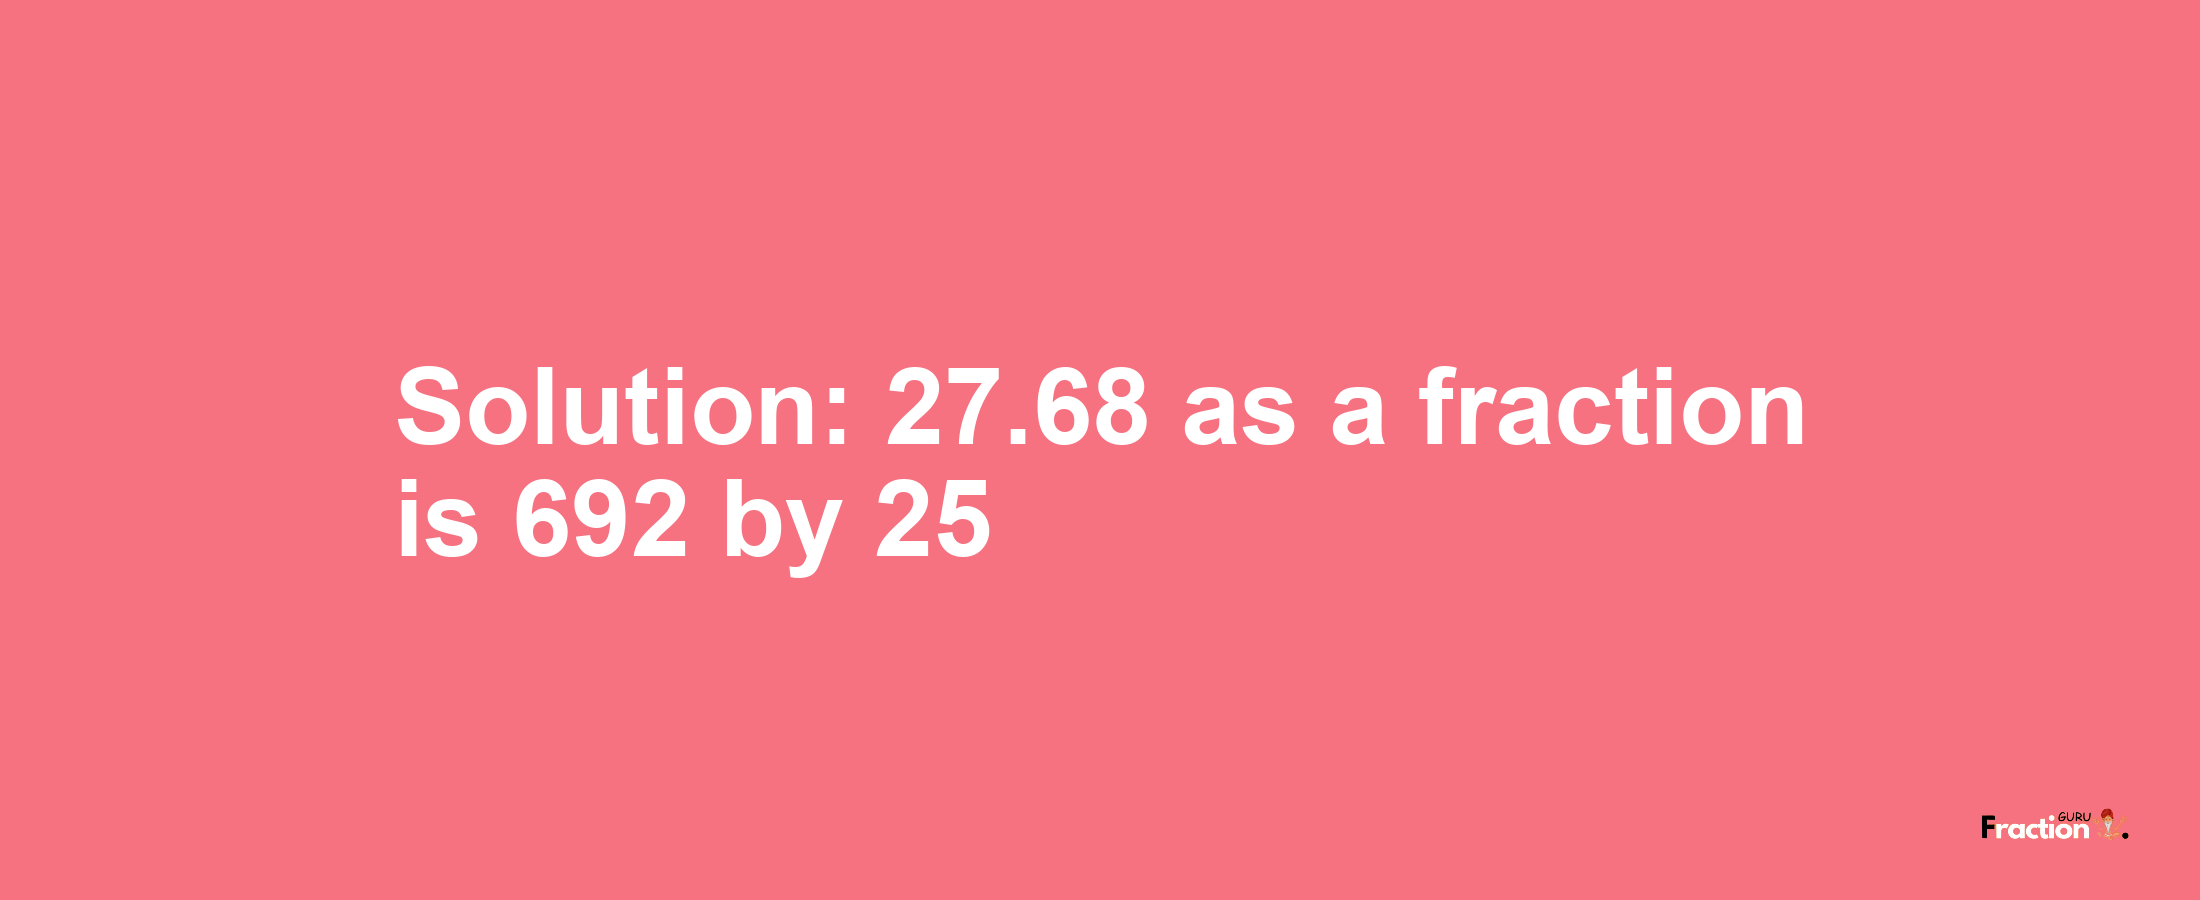 Solution:27.68 as a fraction is 692/25